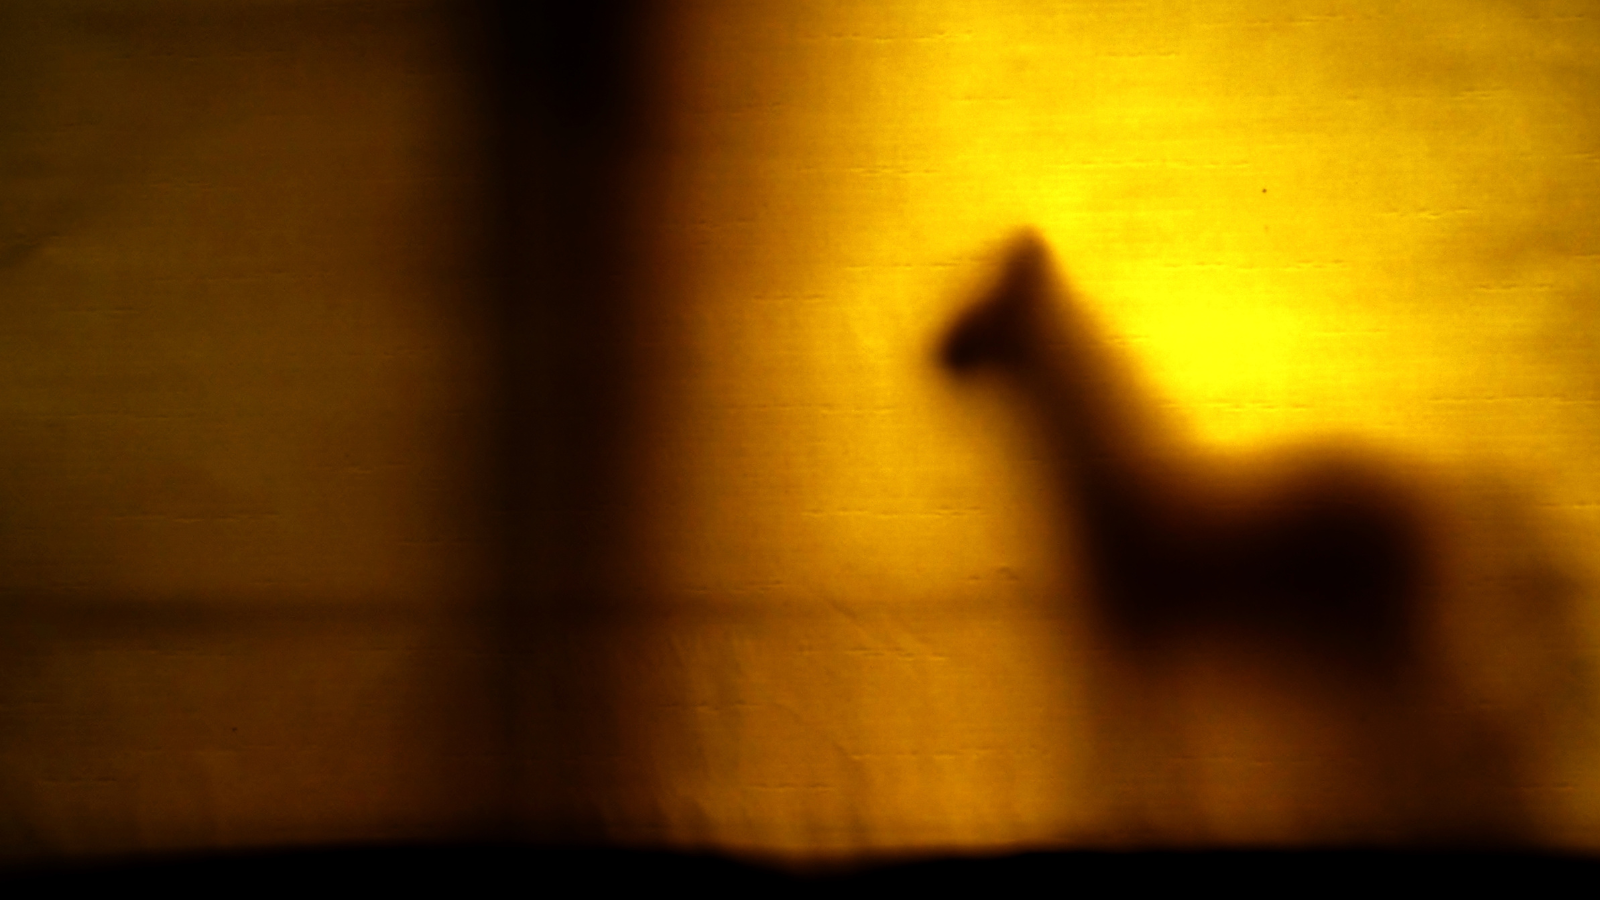 Silhouette of a quadraped animal in yellow light, through the fabric of a tent